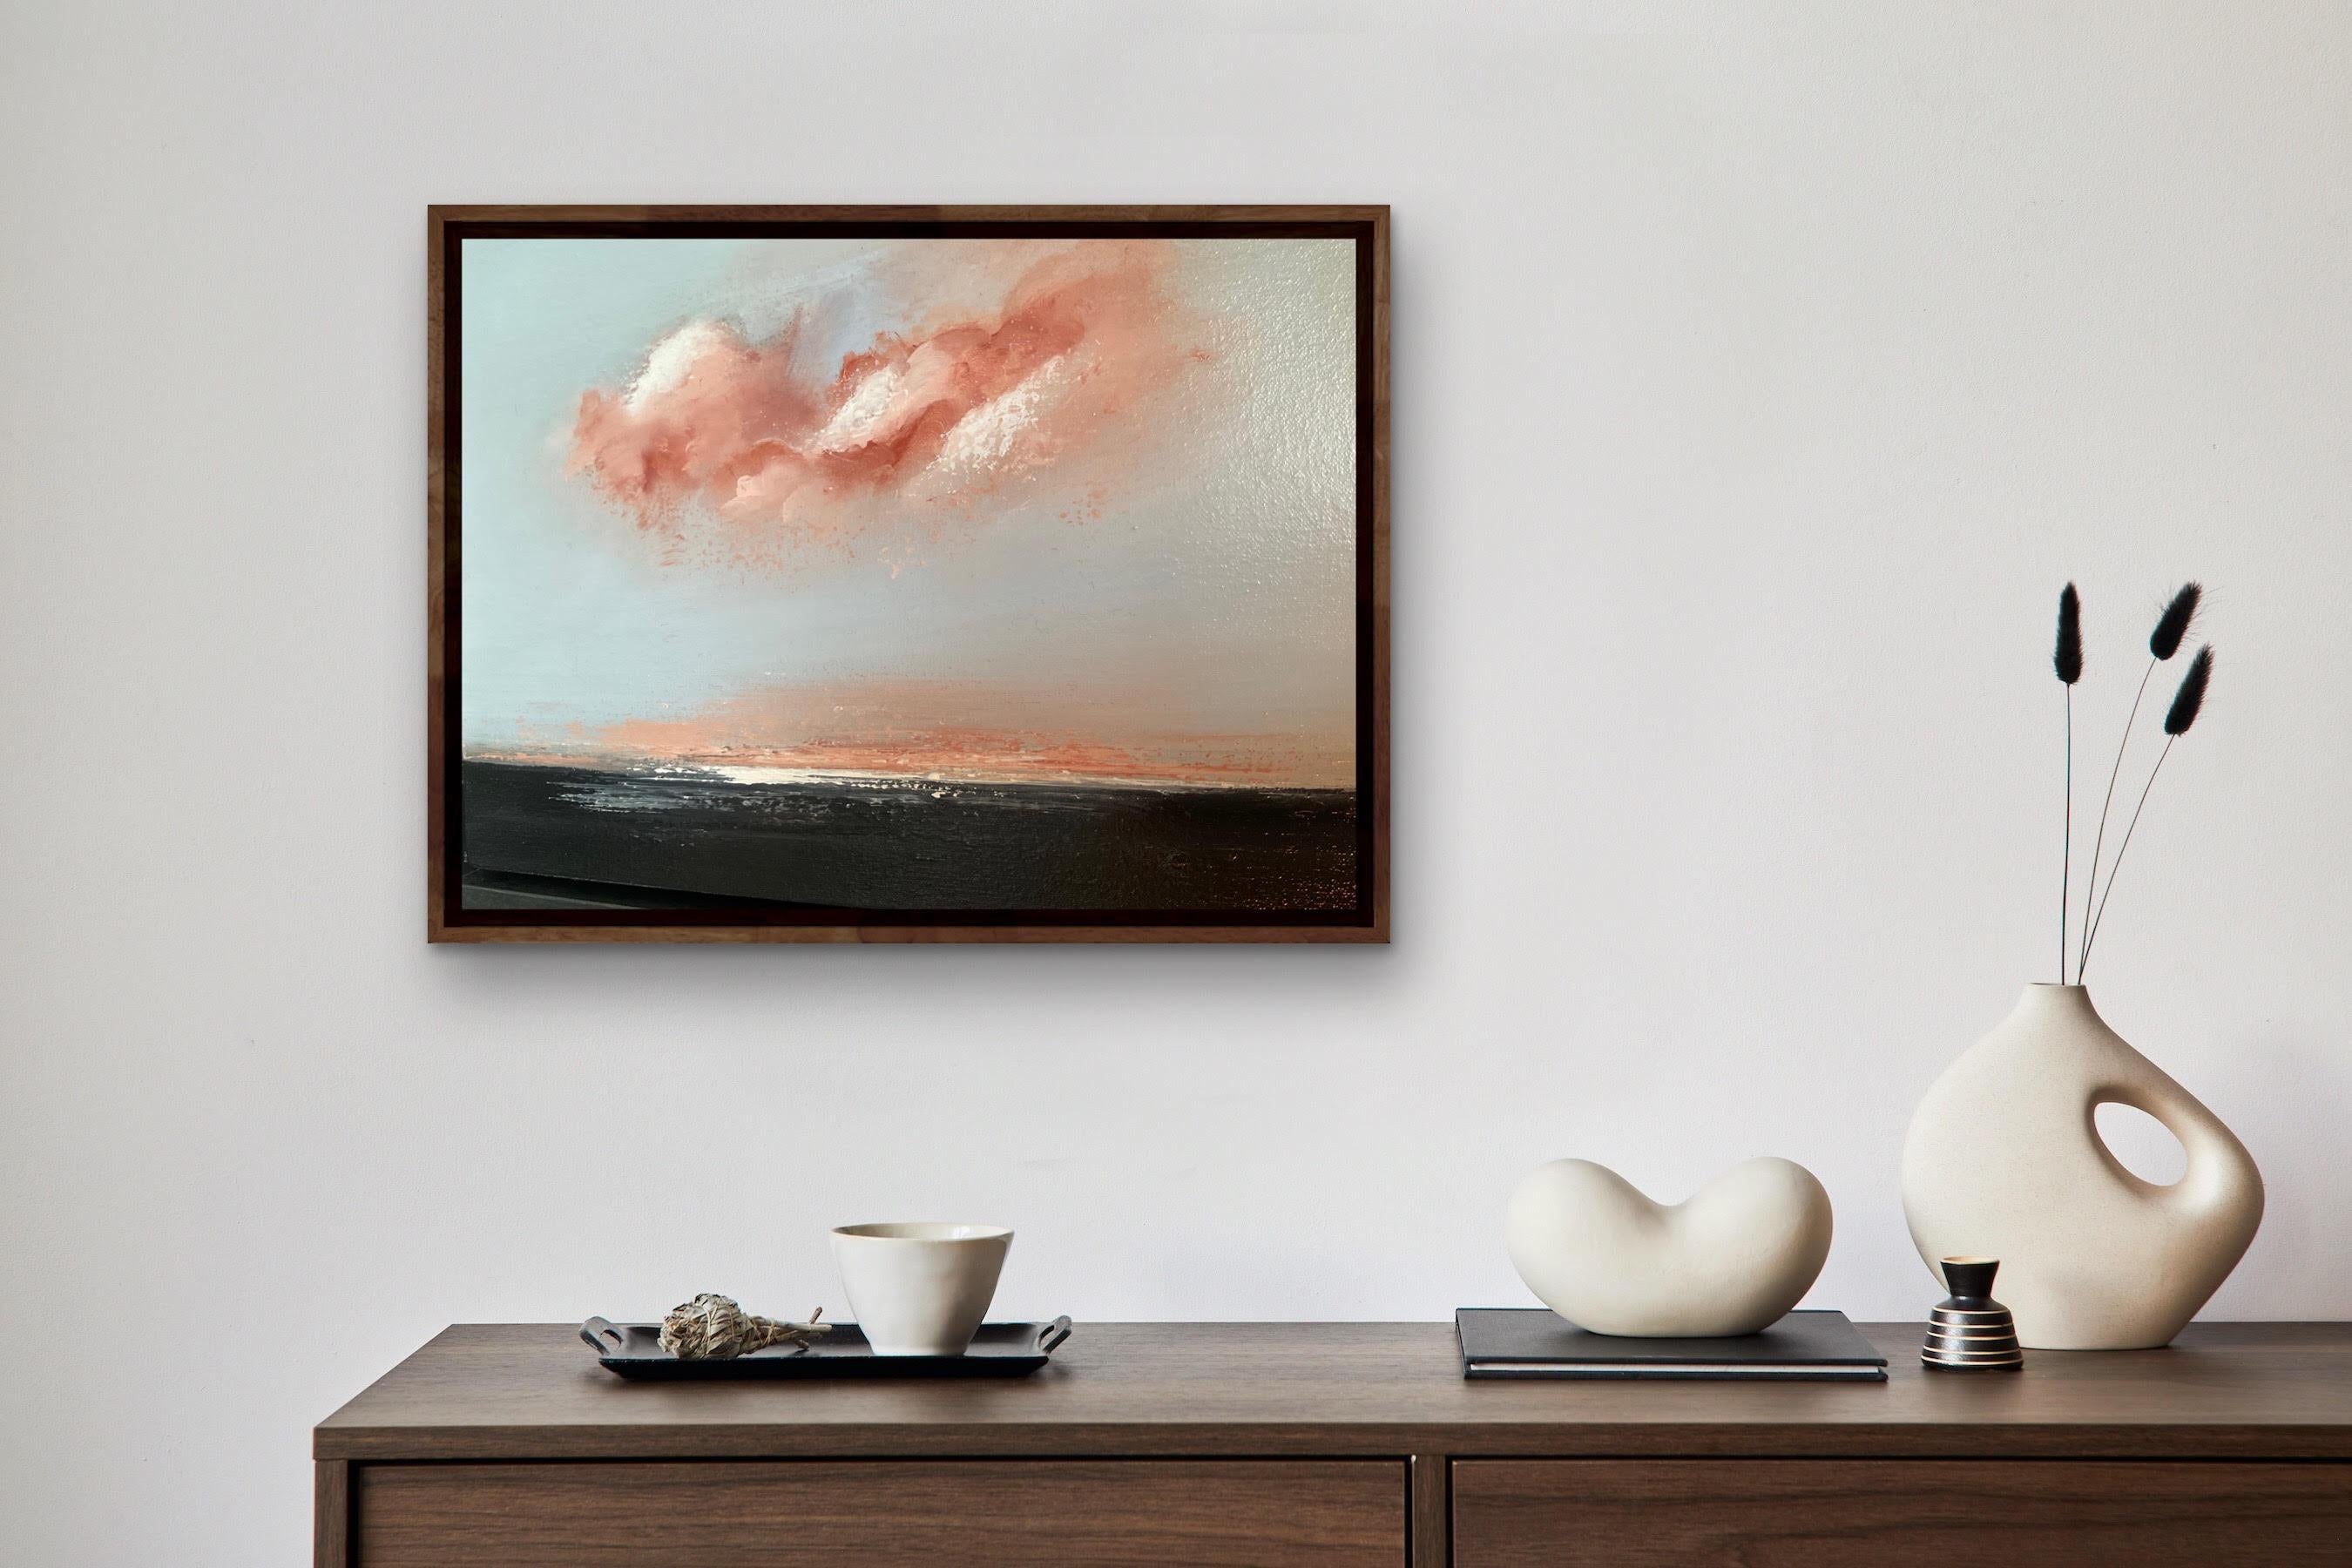 Spring is in the Air, Seasonal Abstract Seascape, Cloud Art, Landscape Painting 6